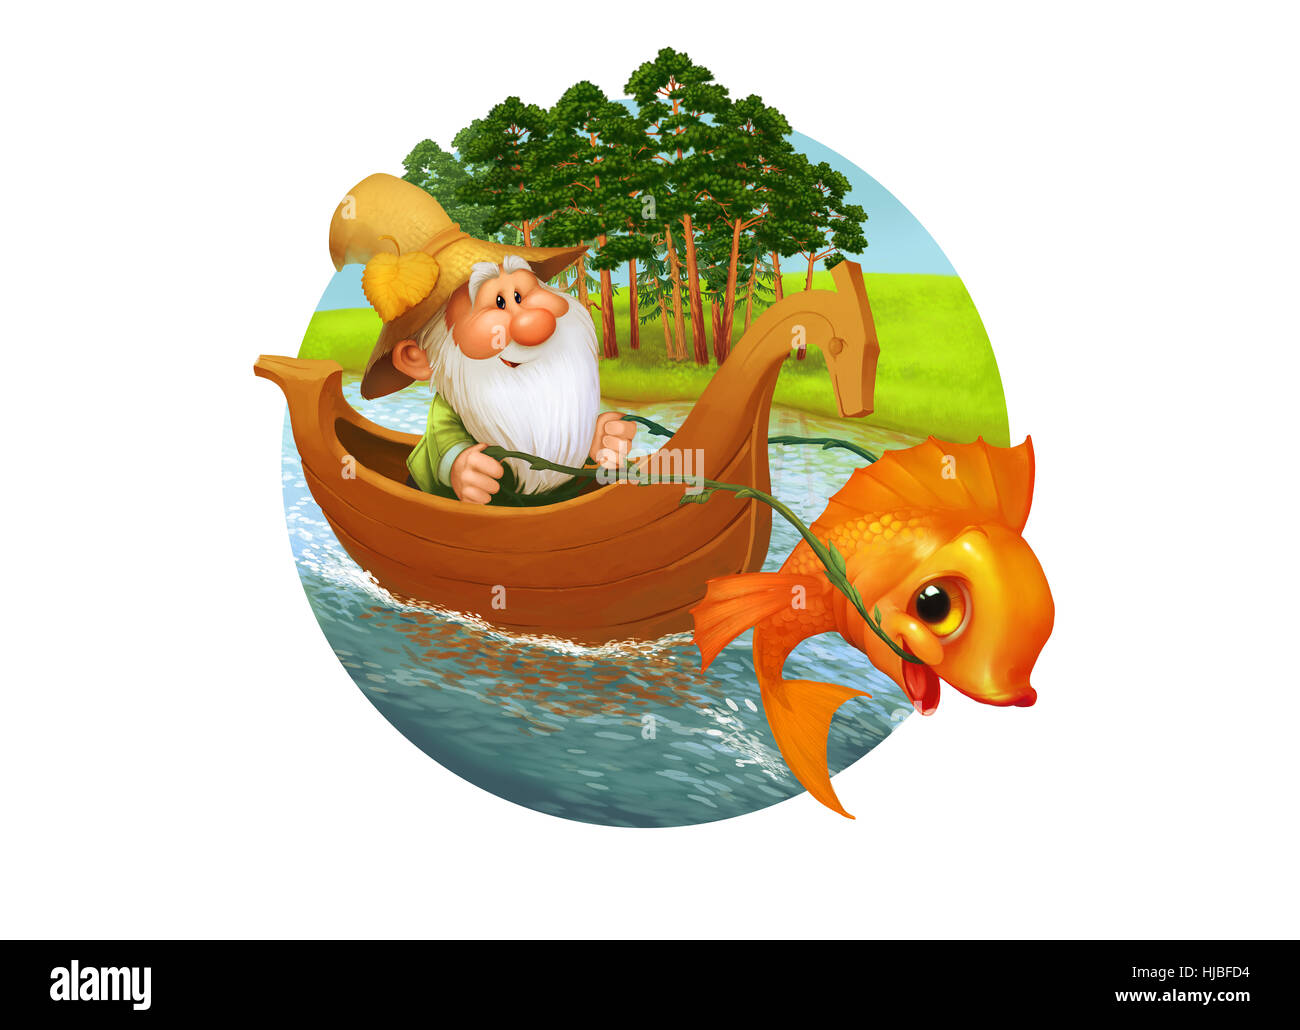 The character of the old fisherman swims on the wood boat with funny goldfish, cartoon illustration. Stock Photo